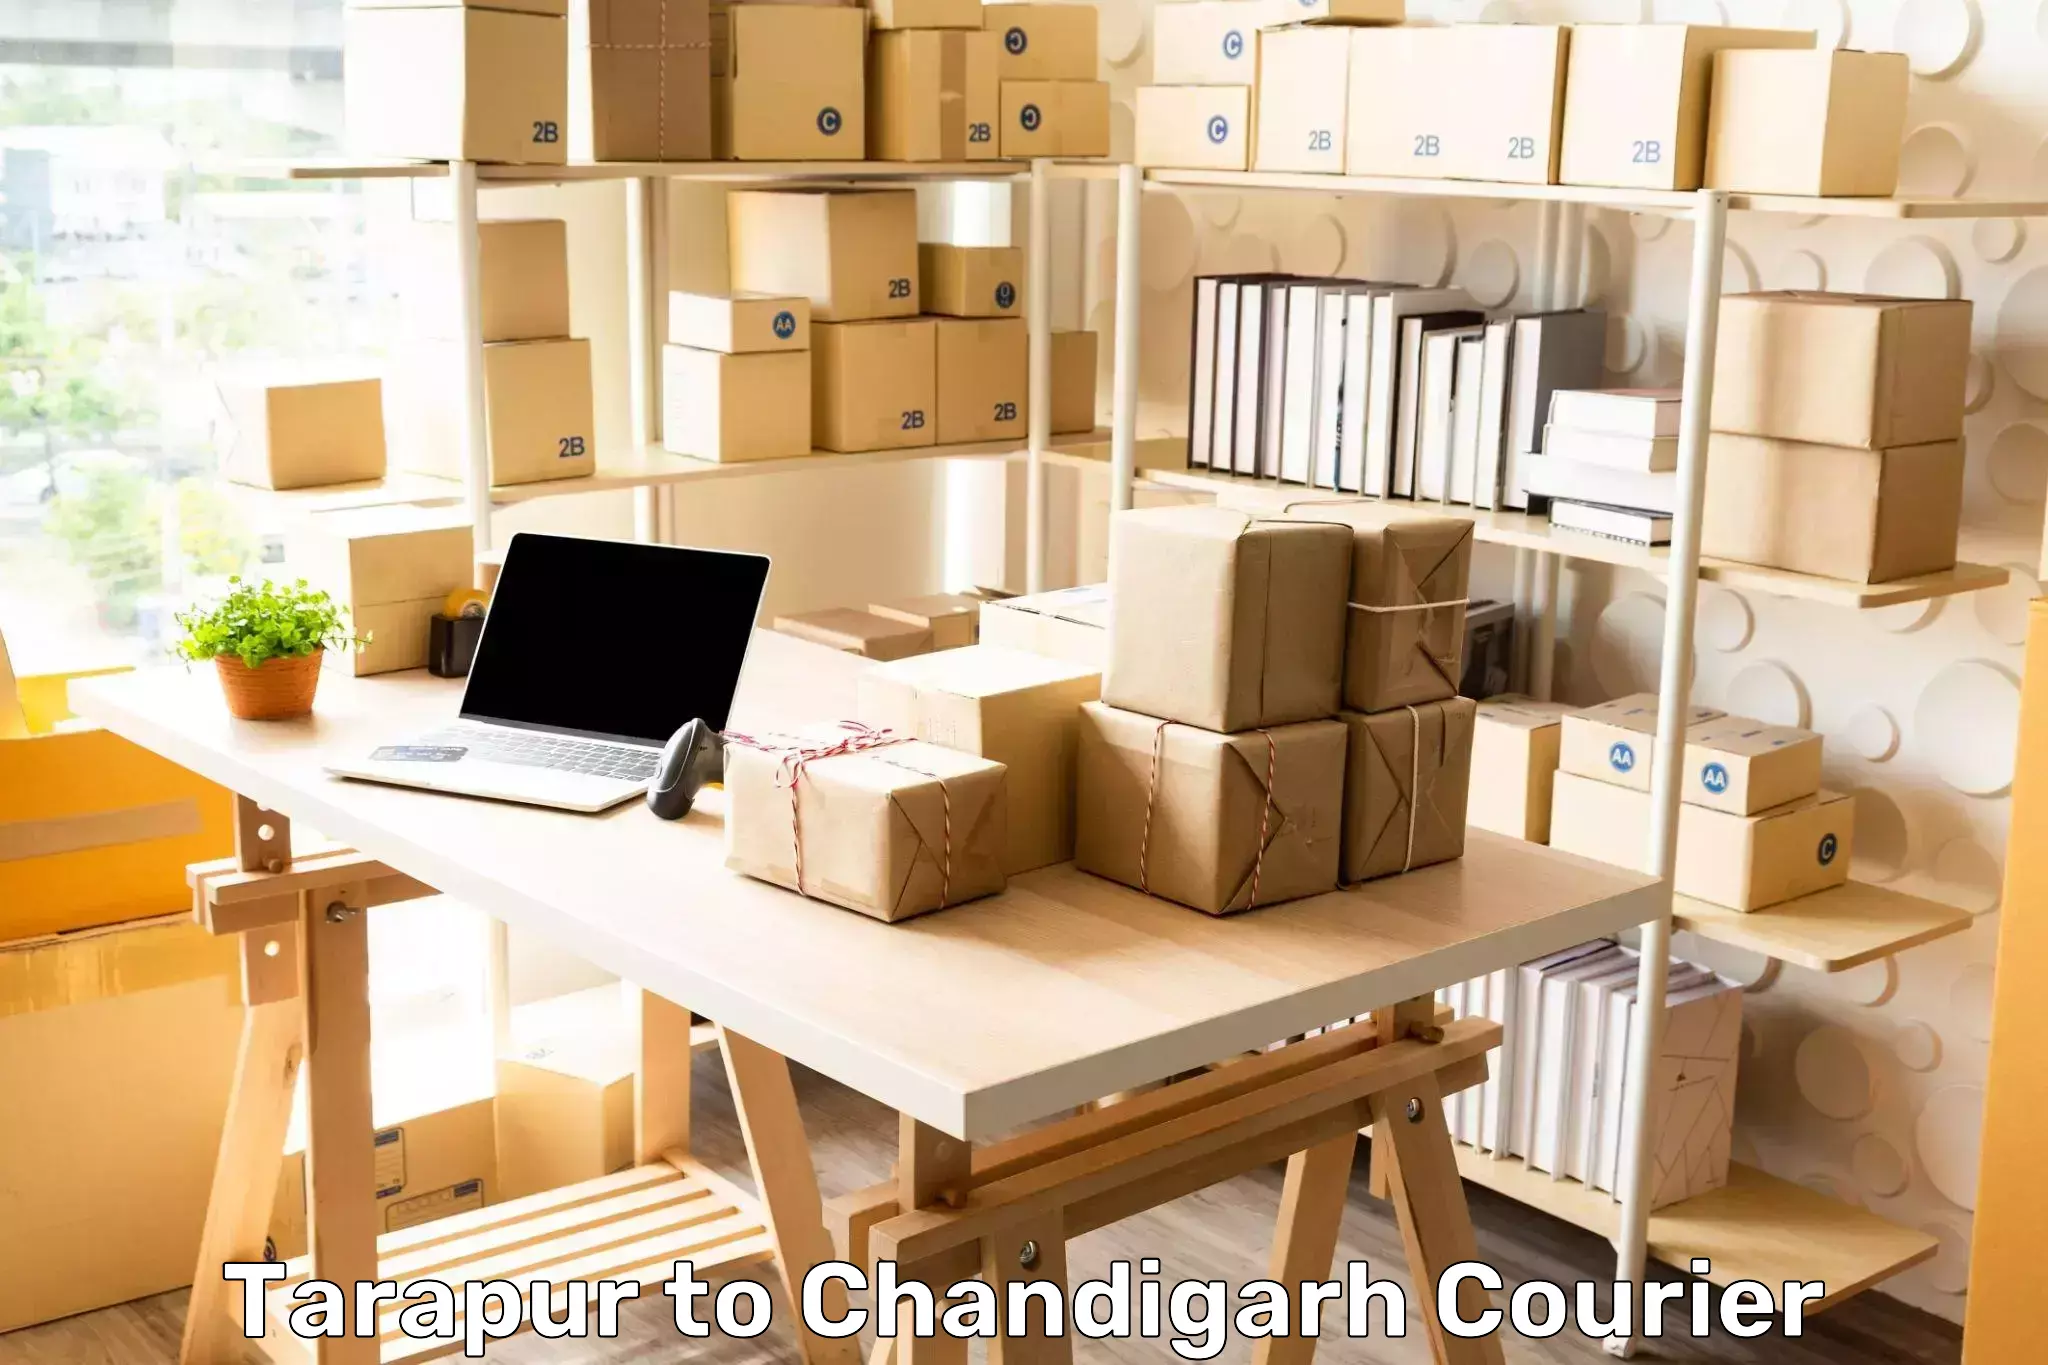 Reliable parcel services Tarapur to Chandigarh